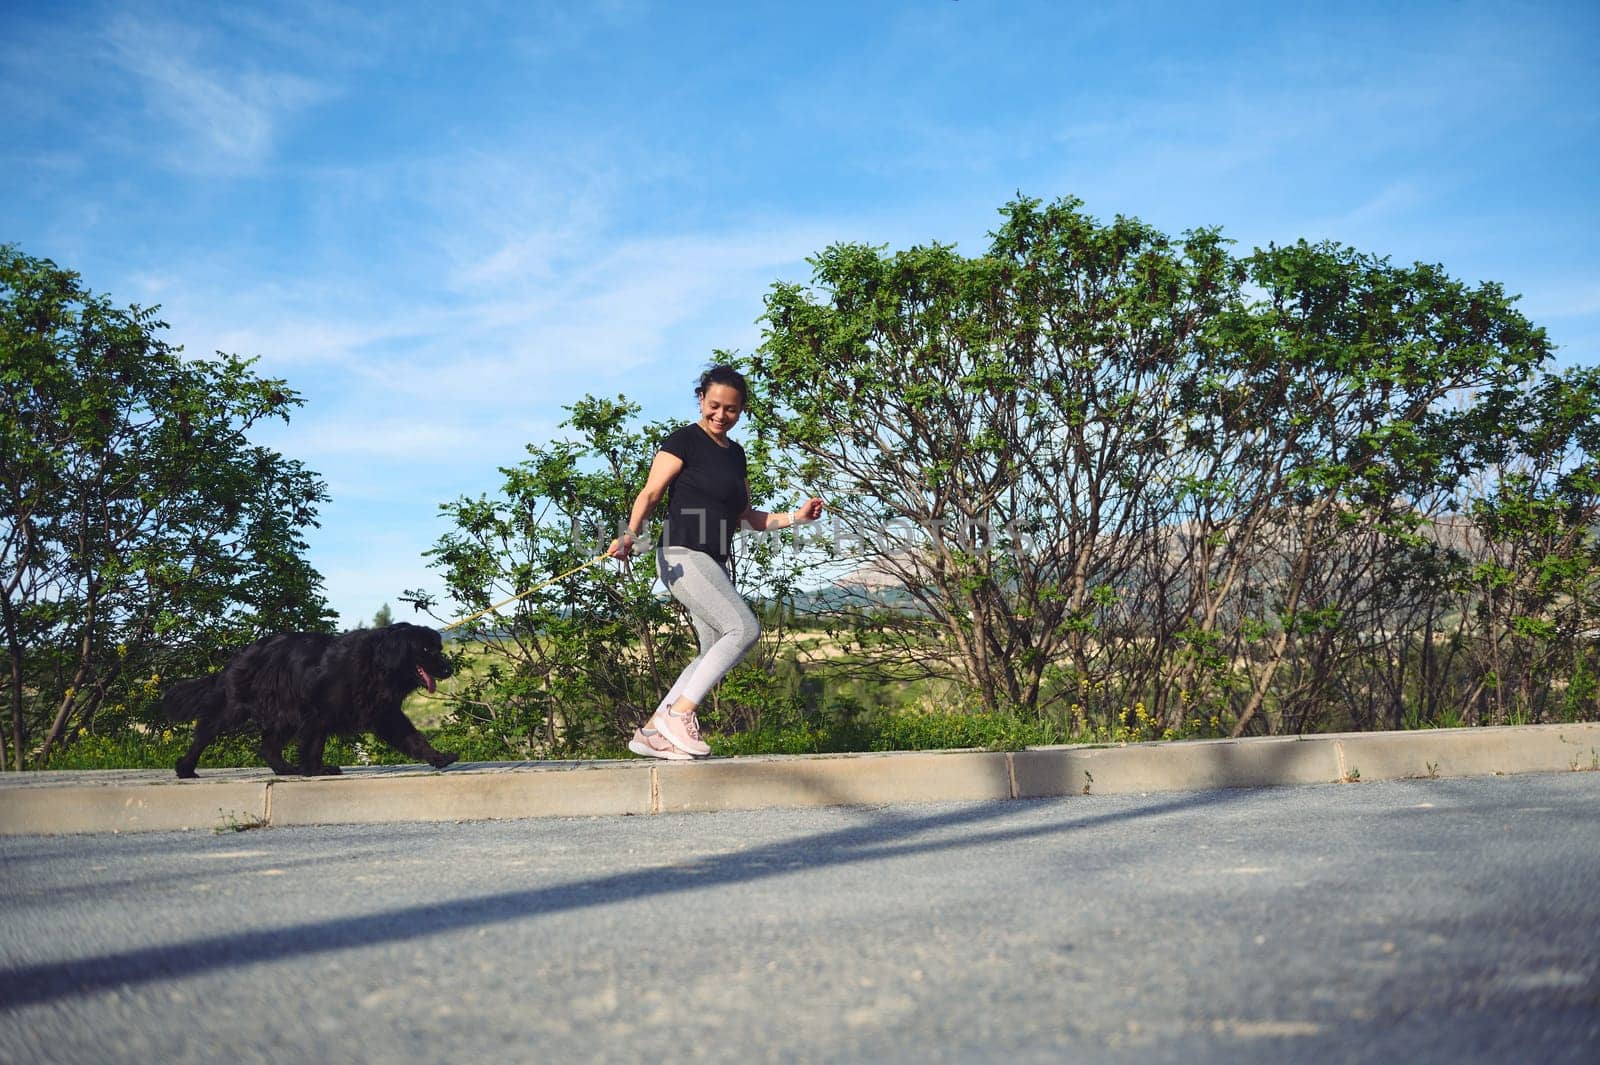 Young active woman jogging with her dog as a fun way to exercise in the nature outdoors. People. Animals. Nature. Active and healthy lifestyle concept. by artgf